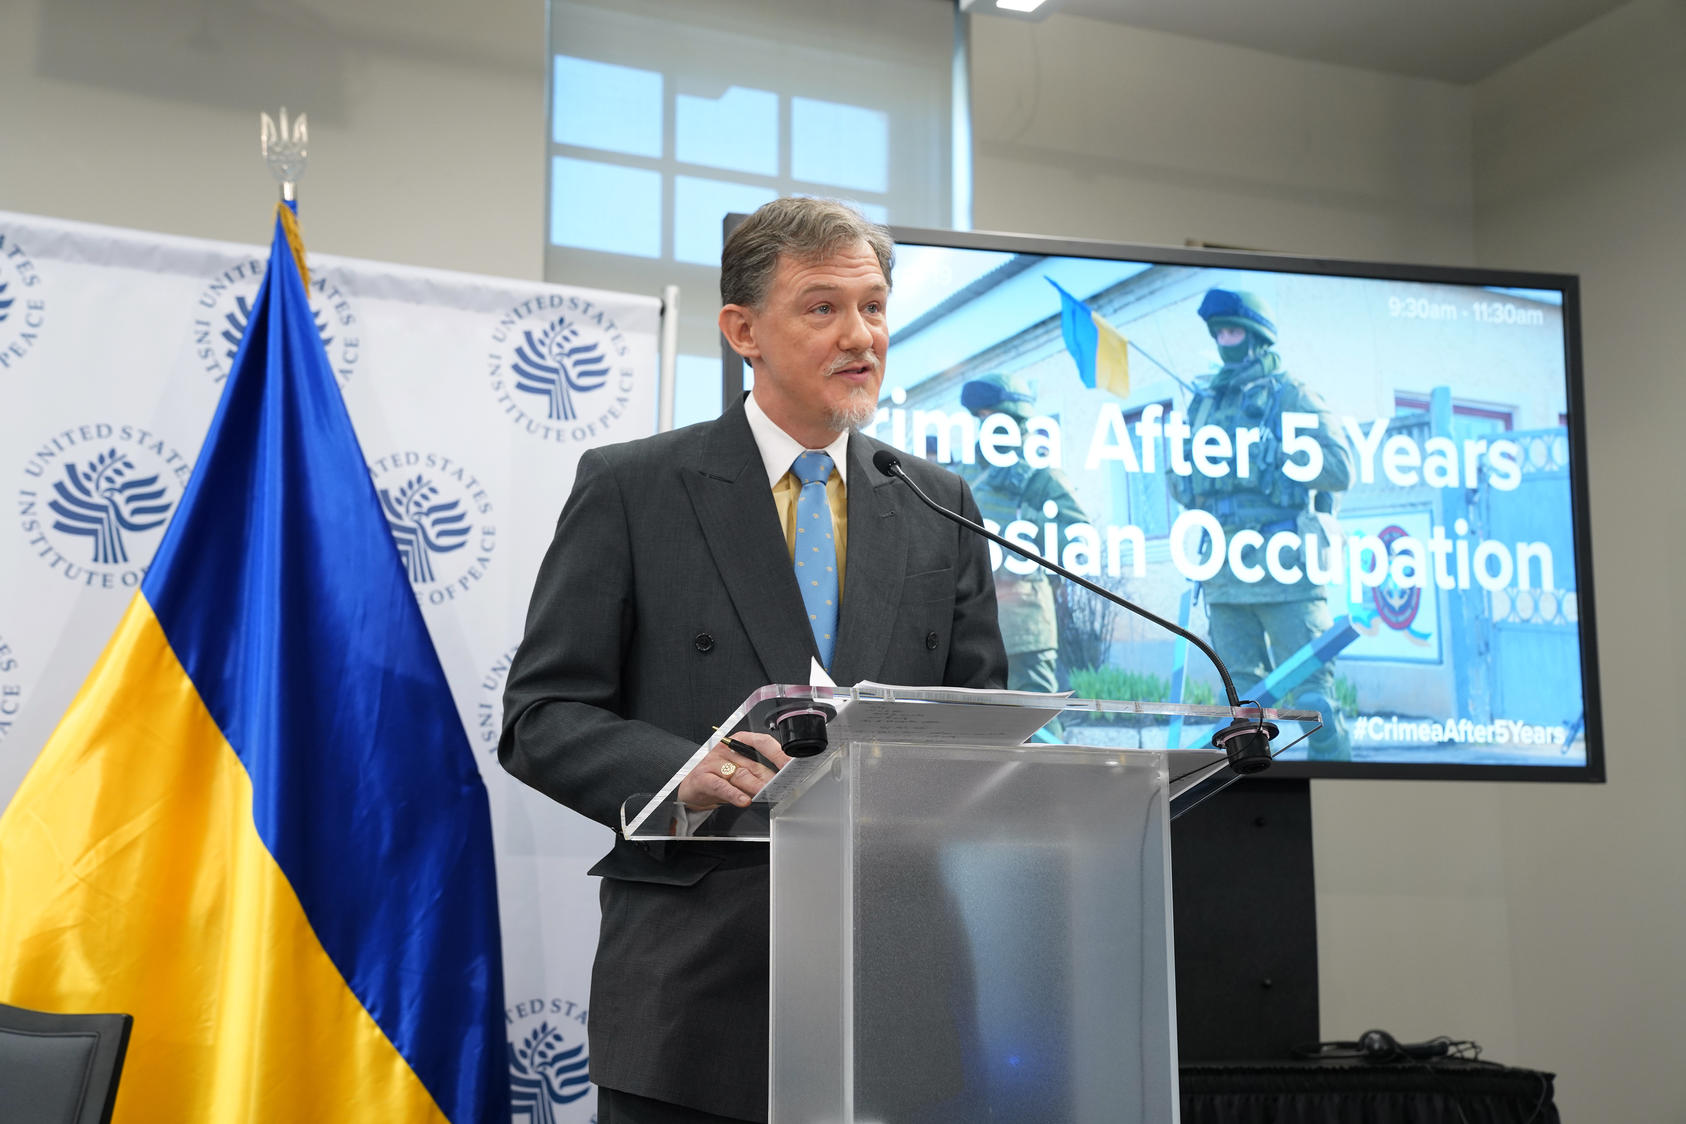 George Kent Deputy Assistant Secretary, Bureau of European and Eurasian Affairs, U.S. Department of State, speaks at the U.S. Institute of Peace, March 20, 2019. 